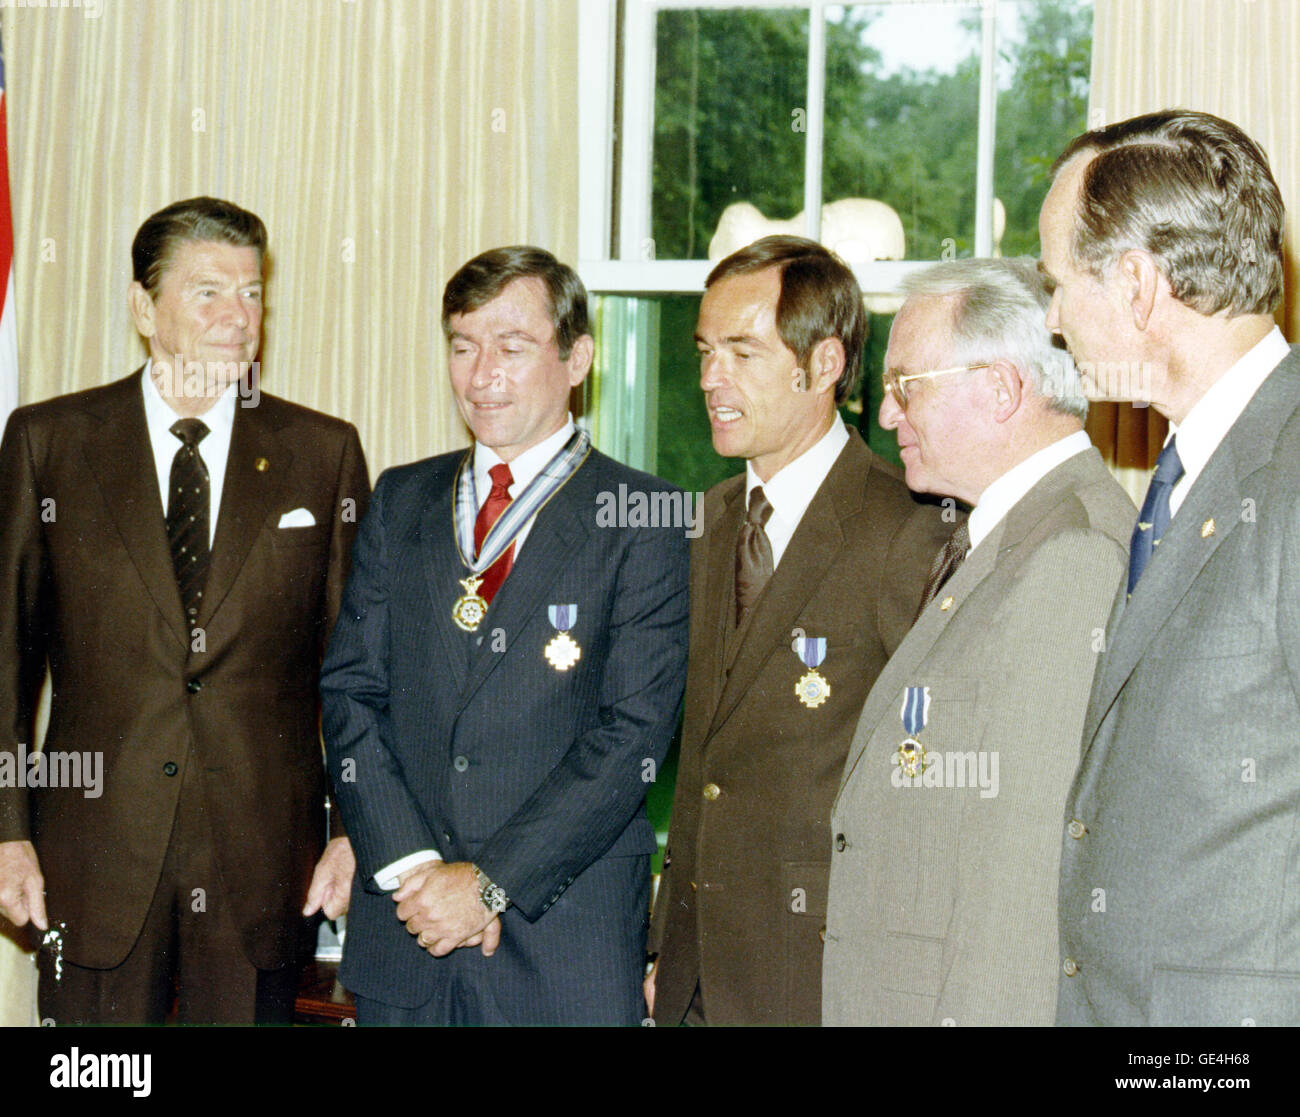 (May 1, 1981) President Ronald Reagan presents astronaut John Young with the Congressional Space Medal of Honor as well as NASA's Distinguished Service Medal. Astronaut Robert C. Crippen also received the Distinguished Service Medal and Dr. Alan Lovelace was presented with the President's Citizens Medal. From left to right: President Ronald Reagan Astronaut, John Young Astronaut, Robert Crippen Dr. Alan Lovelace Vice President George Bush  Image # : 81-HC-389 Stock Photo